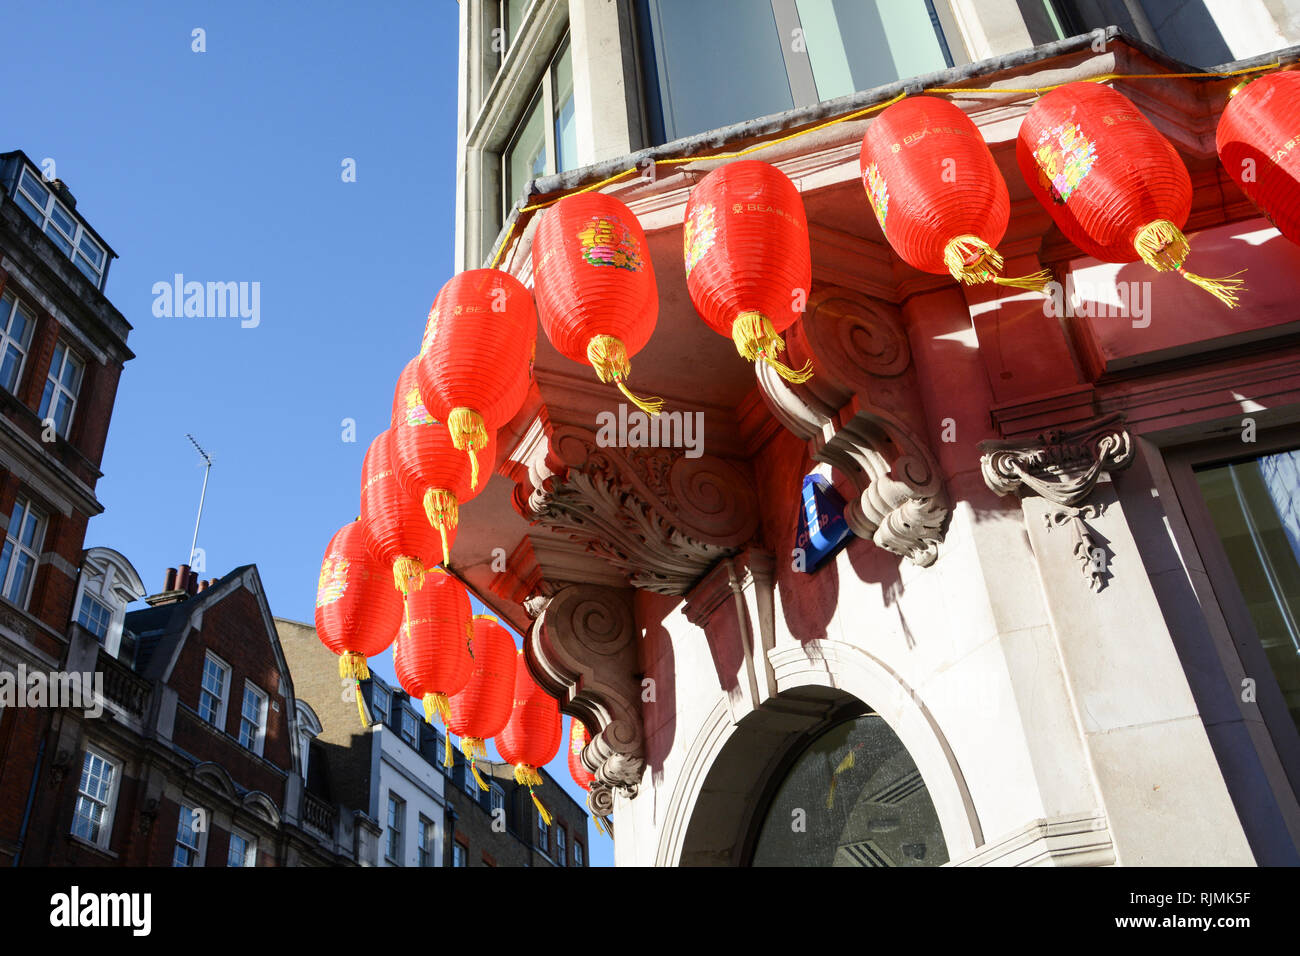 Year of the Pig Chinese New Year decorations in Soho, London, UK Stock Photo